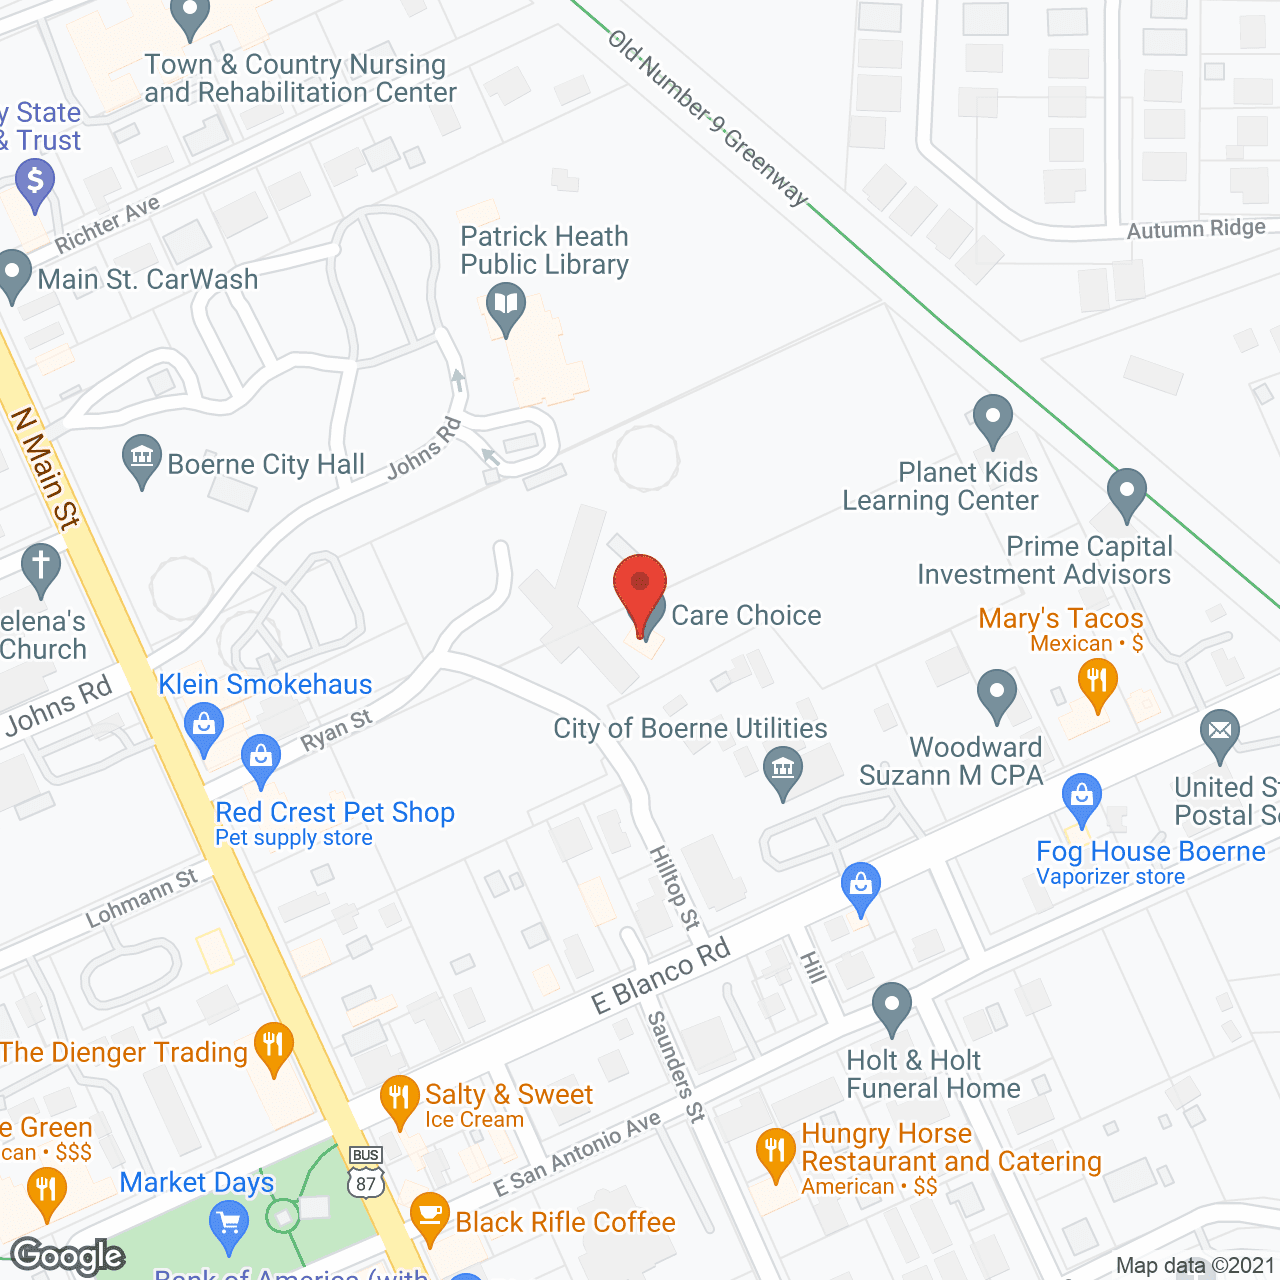 Hilltop Nursing Home Care Choice in google map